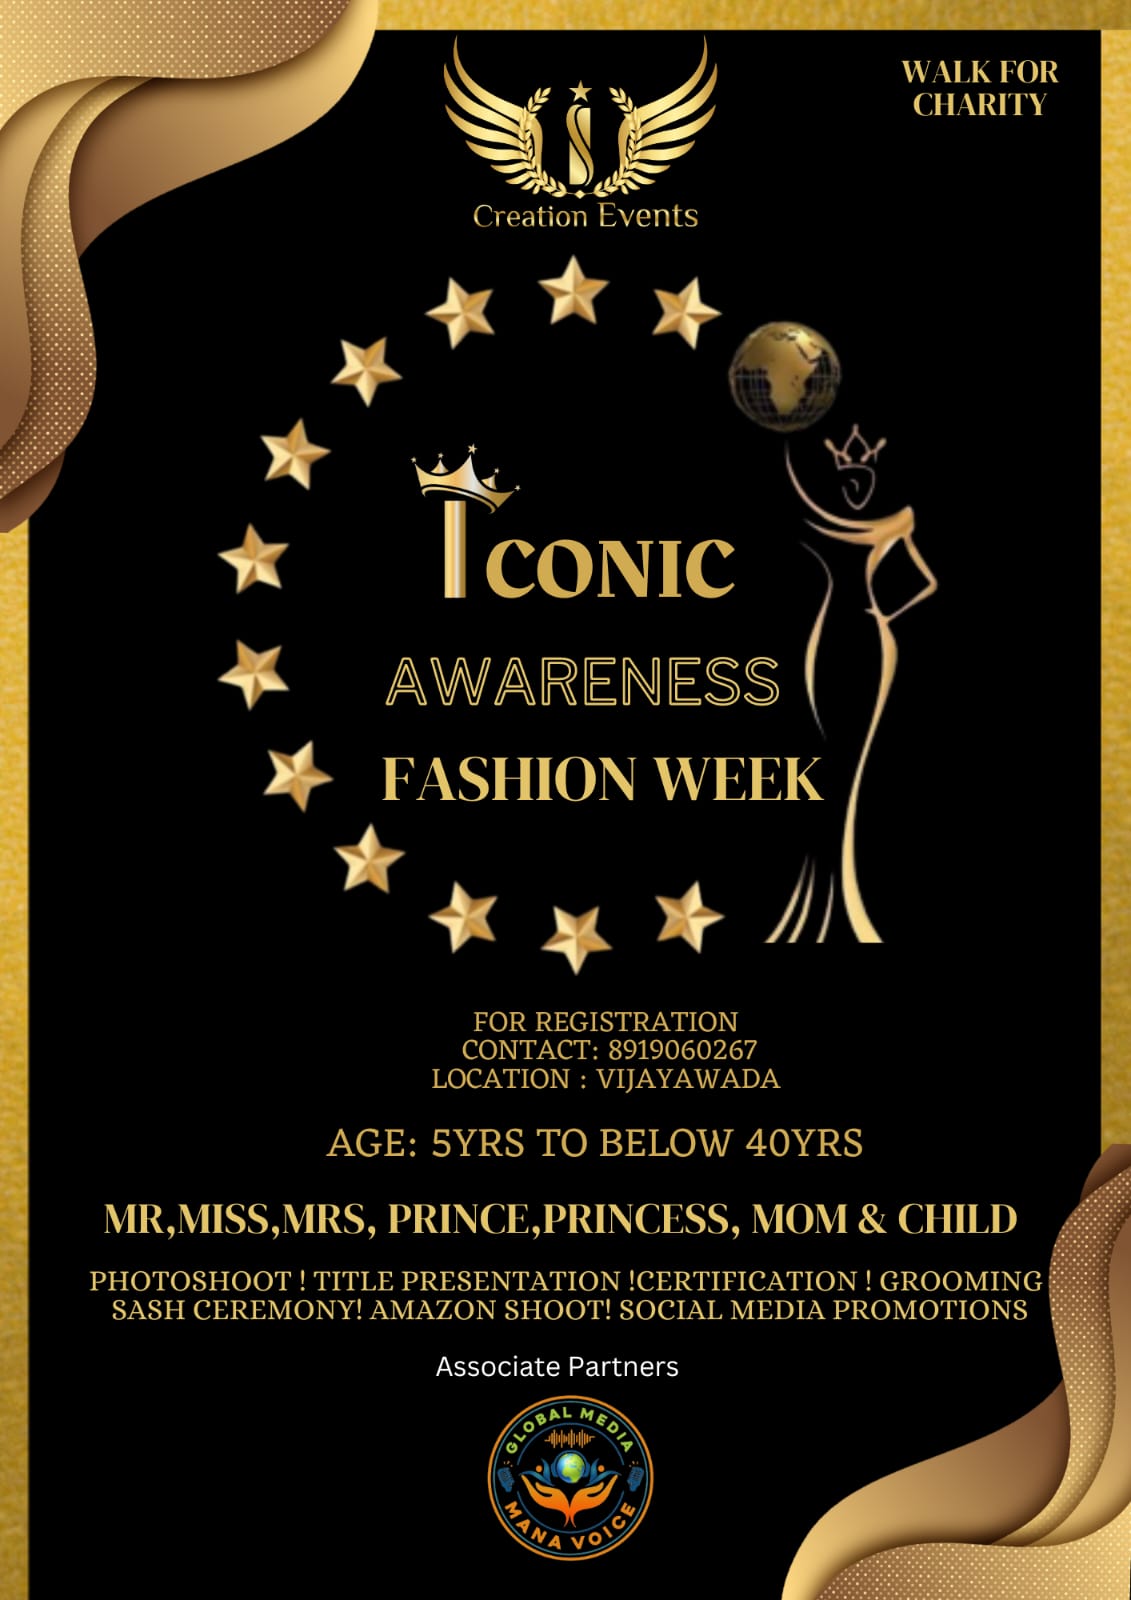 ICONIC AWARENESS FASHION WEEK | Walk For Charity  | For Registrationj - 8919060267 | Vijayawada | Event By i Creation Events | Mana Voice Fashions 